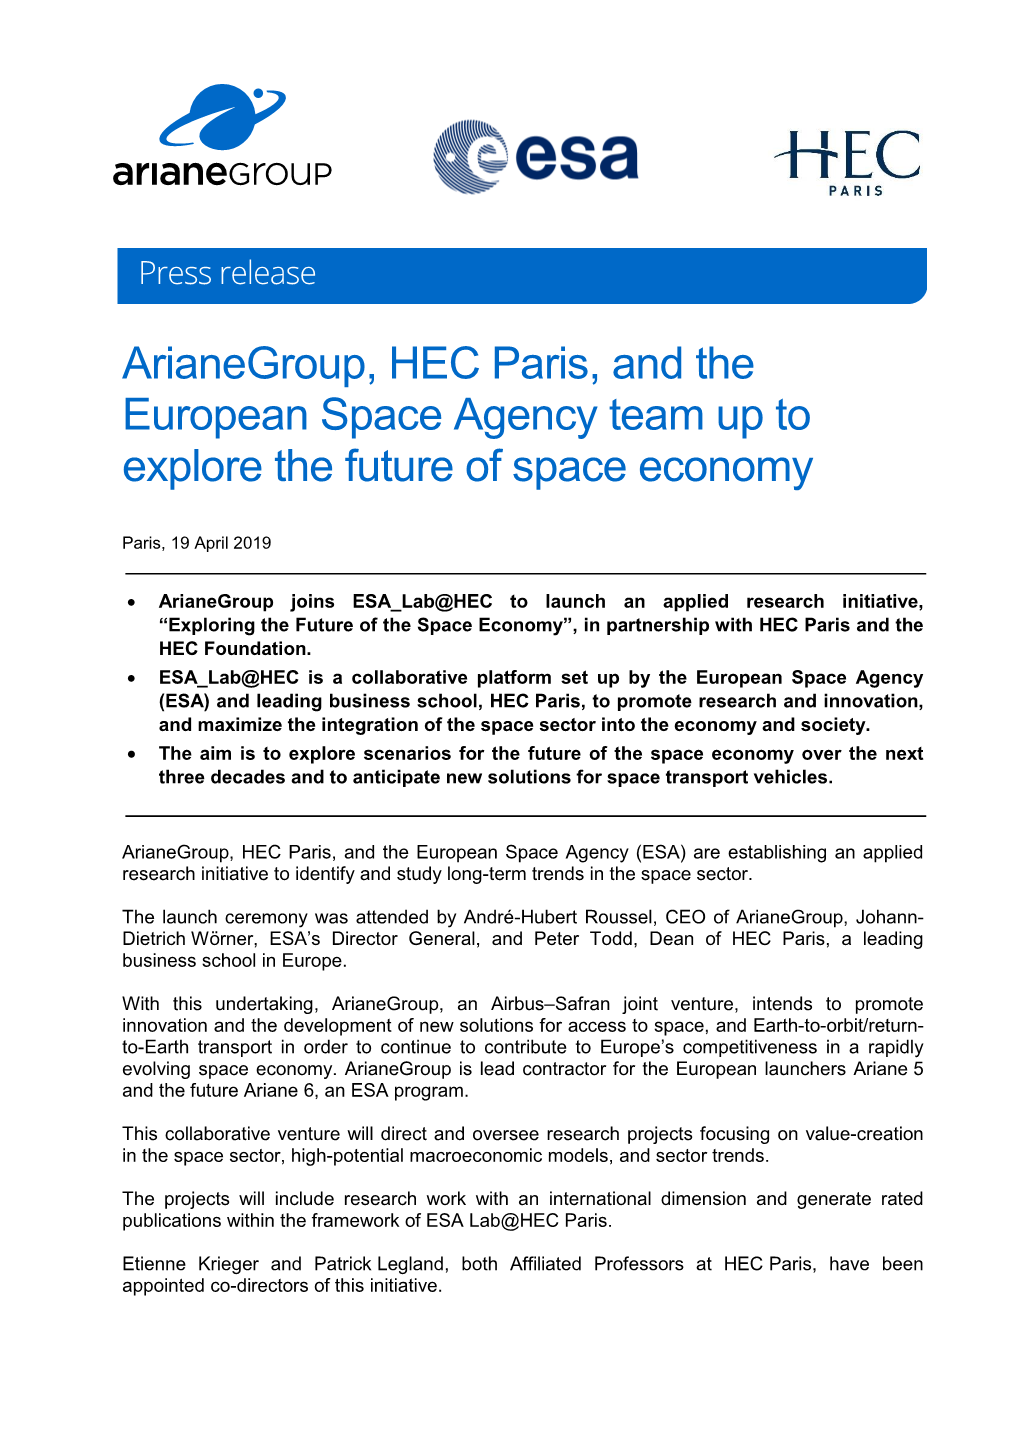 Arianegroup, HEC Paris, and the European Space Agency Team up to Explore the Future of Space Economy